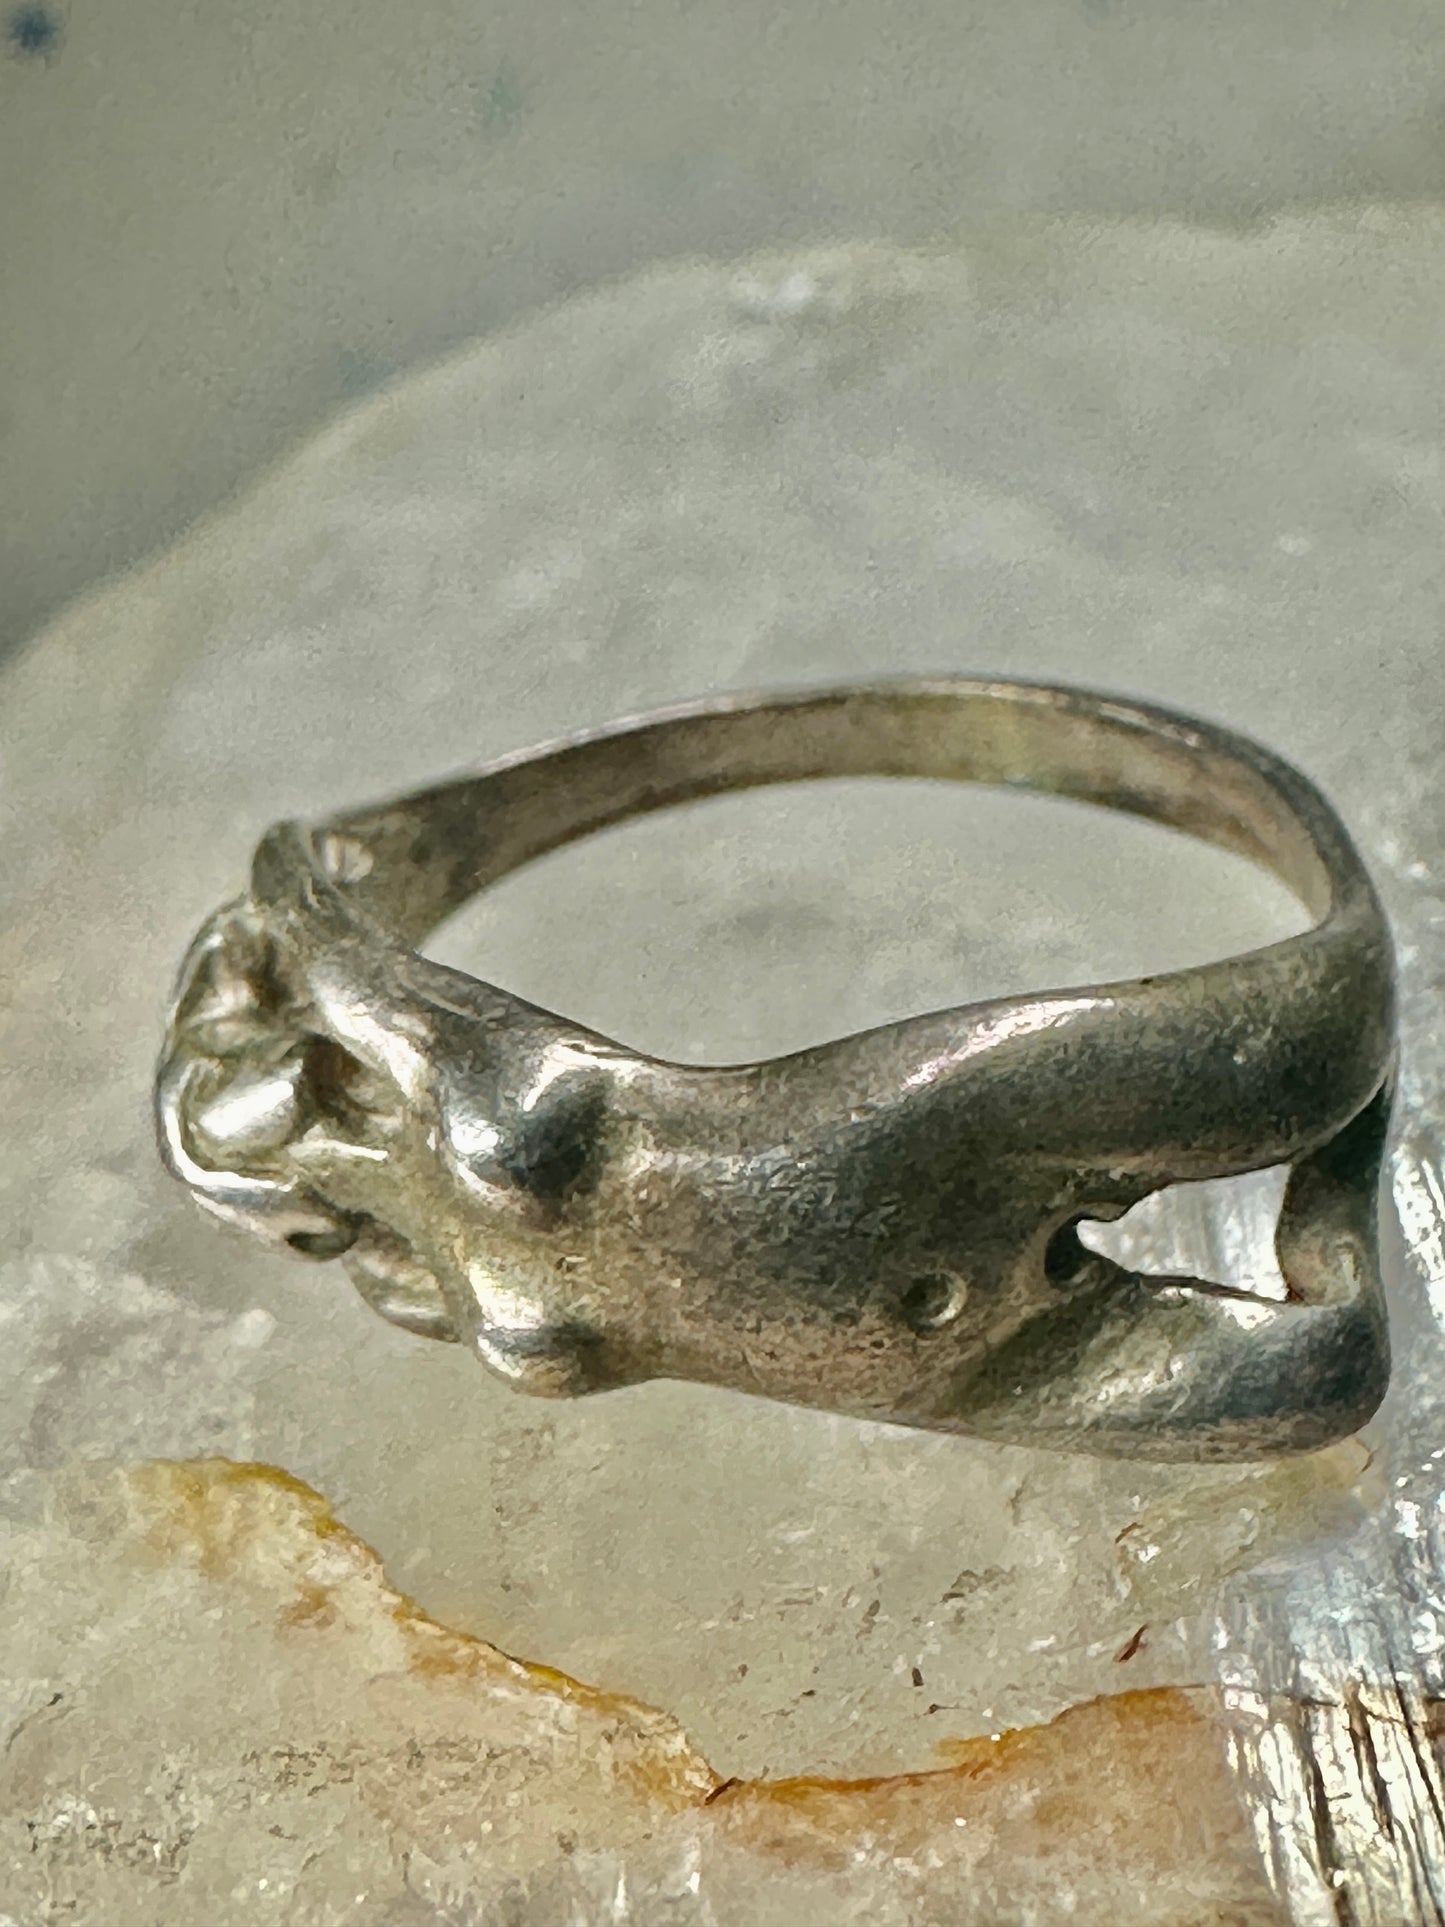 Nude woman ring naked lady band sterling silver prom size 5 women